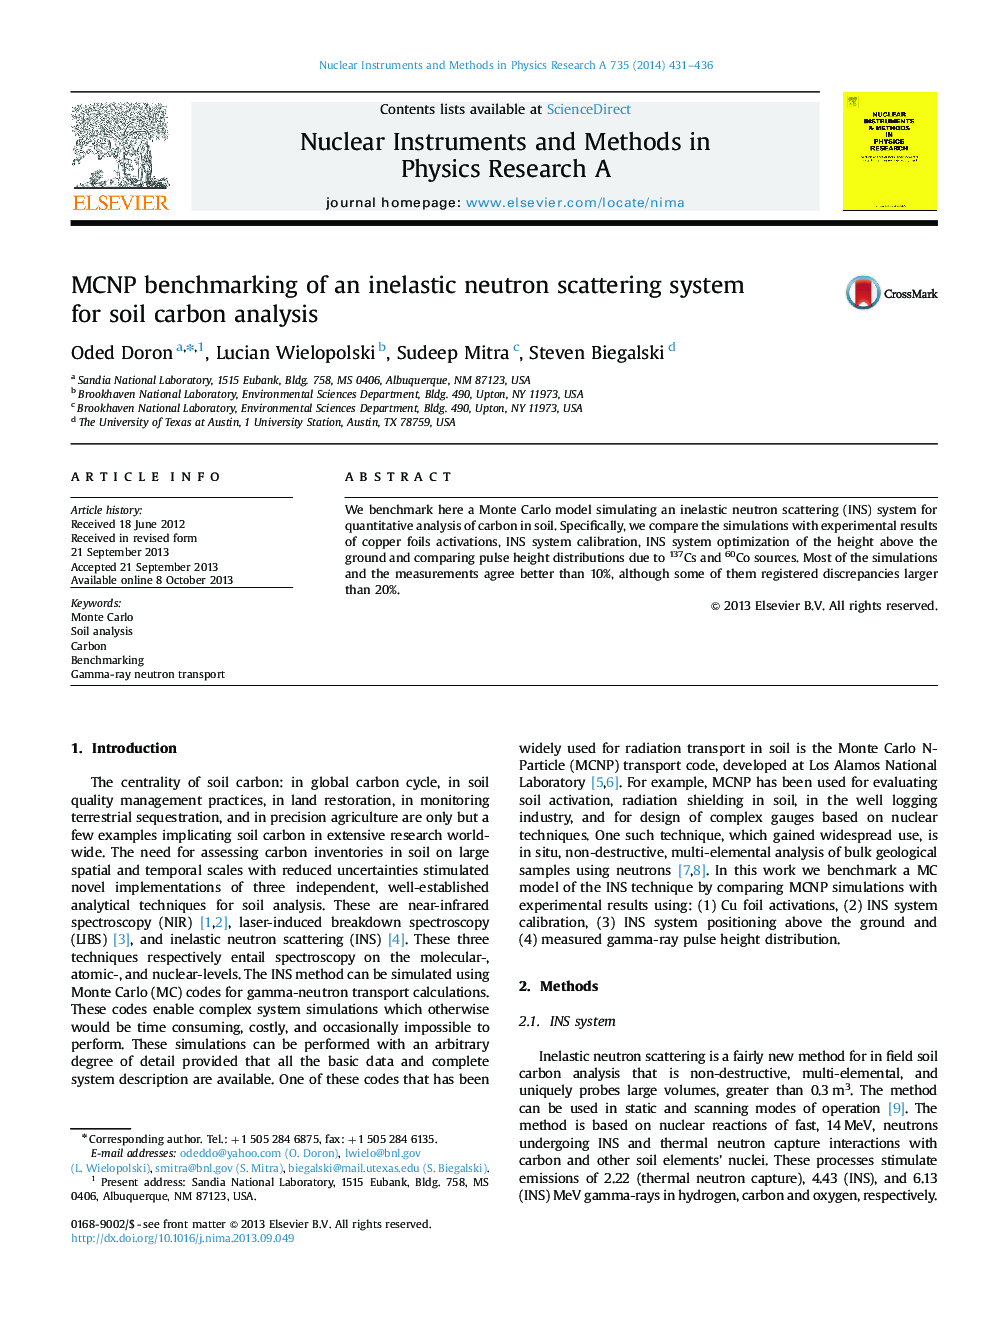 MCNP benchmarking of an inelastic neutron scattering system for soil carbon analysis